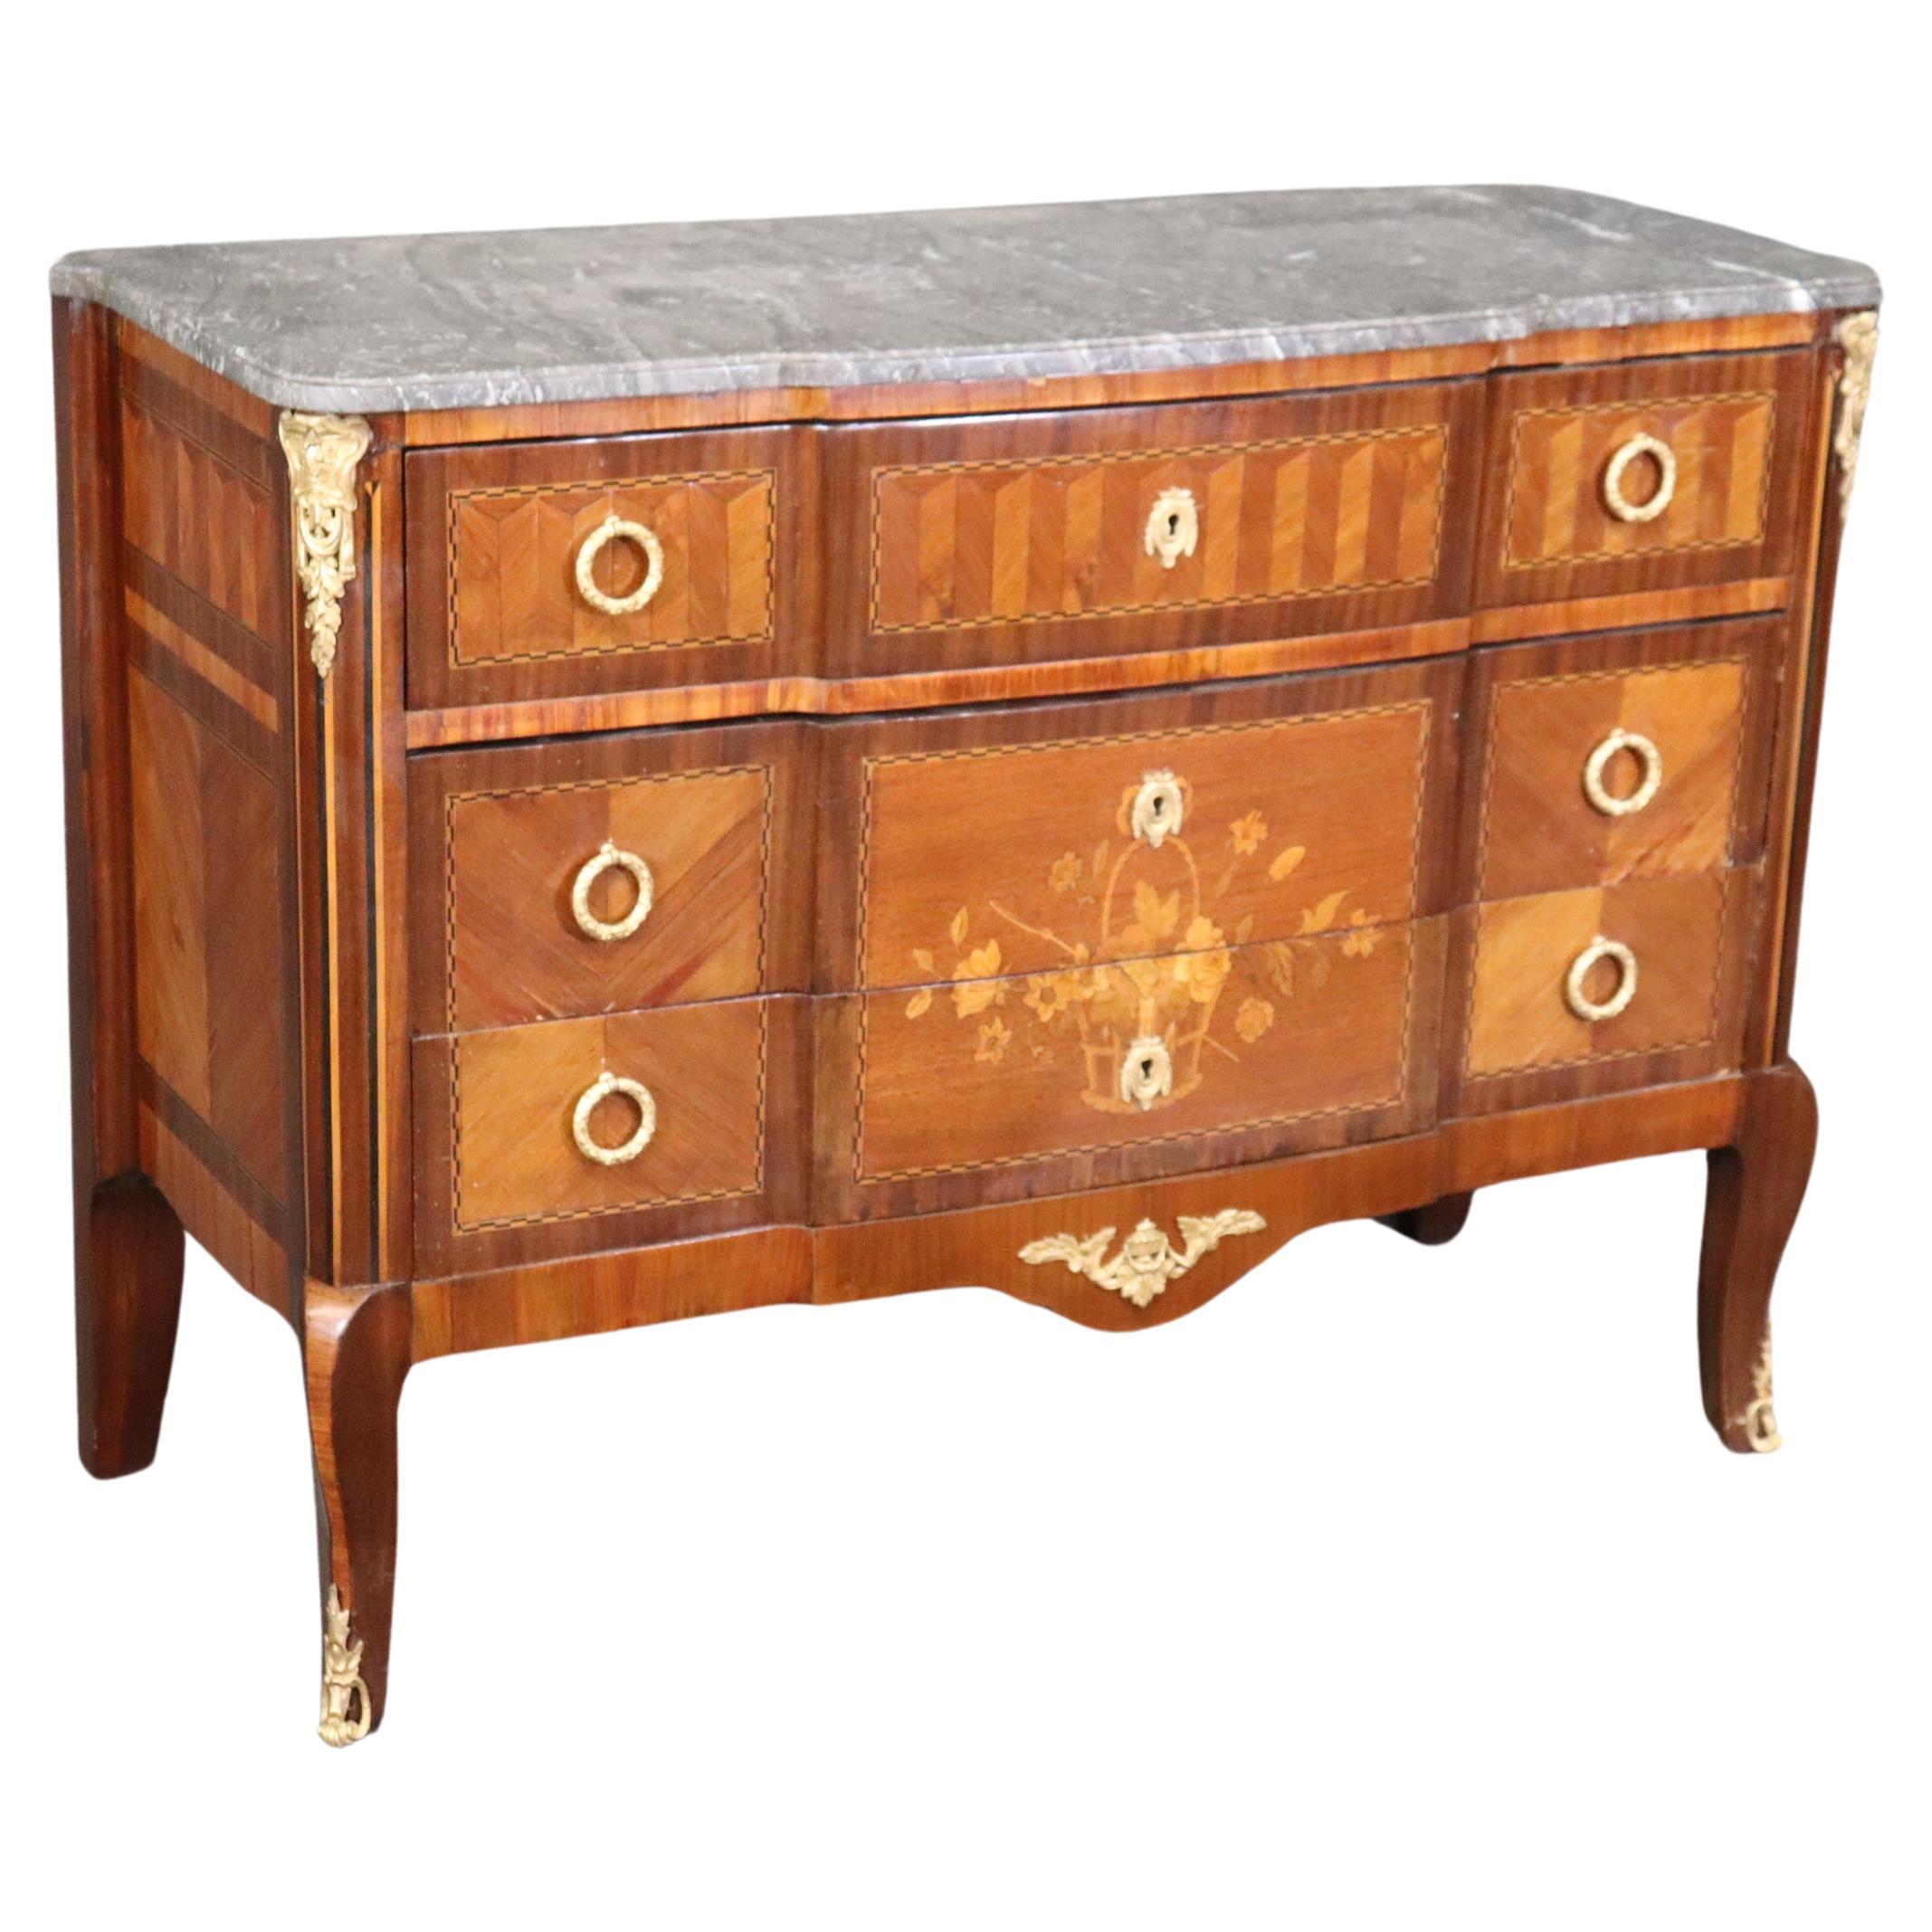 Antique 19th Century French Louis XV Style Inlaid Marble Top Commode For Sale